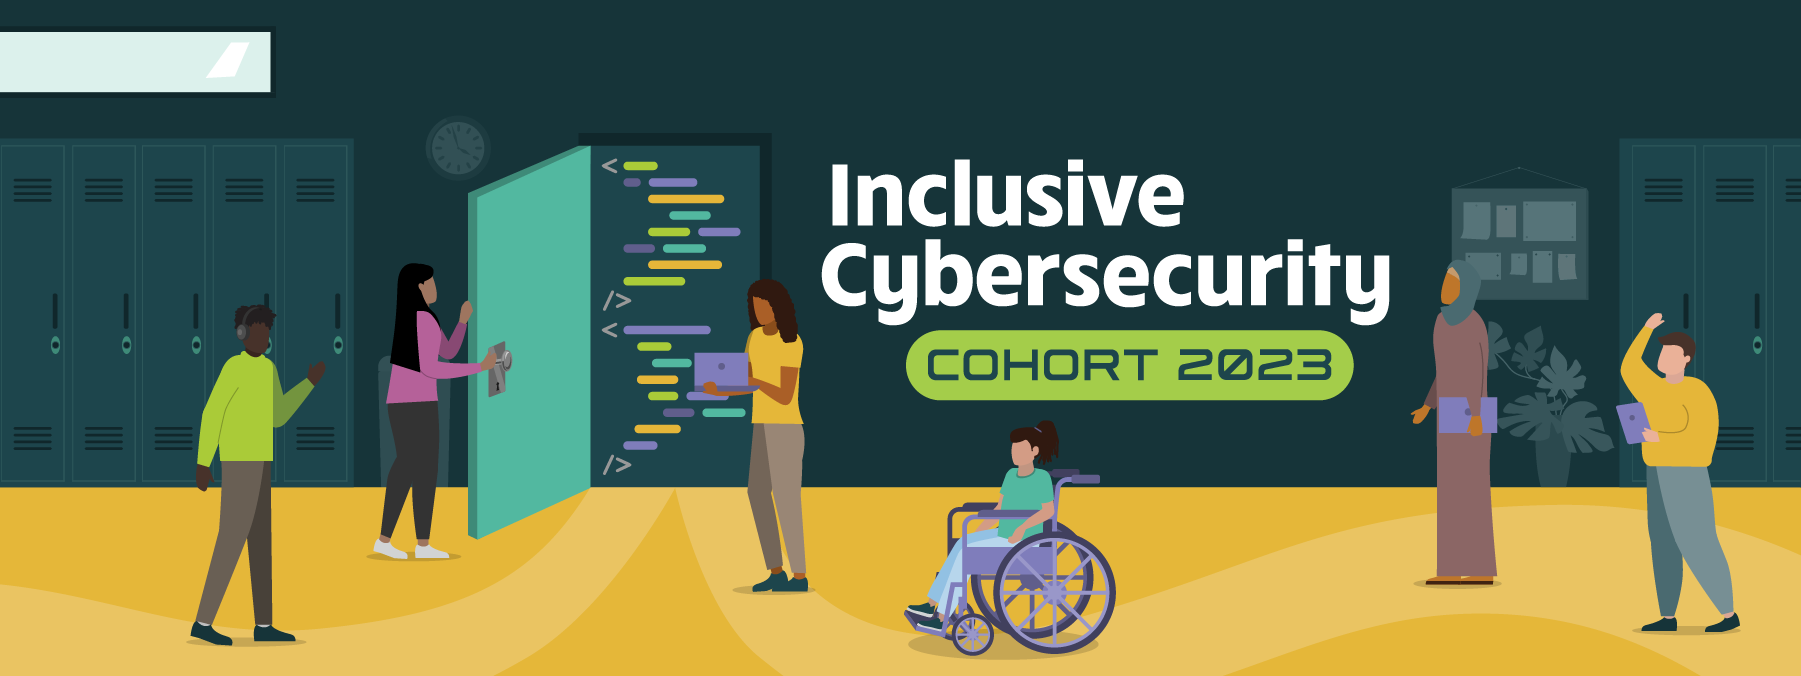 Illustration with text reading: Inclusive Cybersecurity: Cohort 2023. The illustration shows students in a high school hallway. Next to the lockers, one student opens a door revealing a space with code.